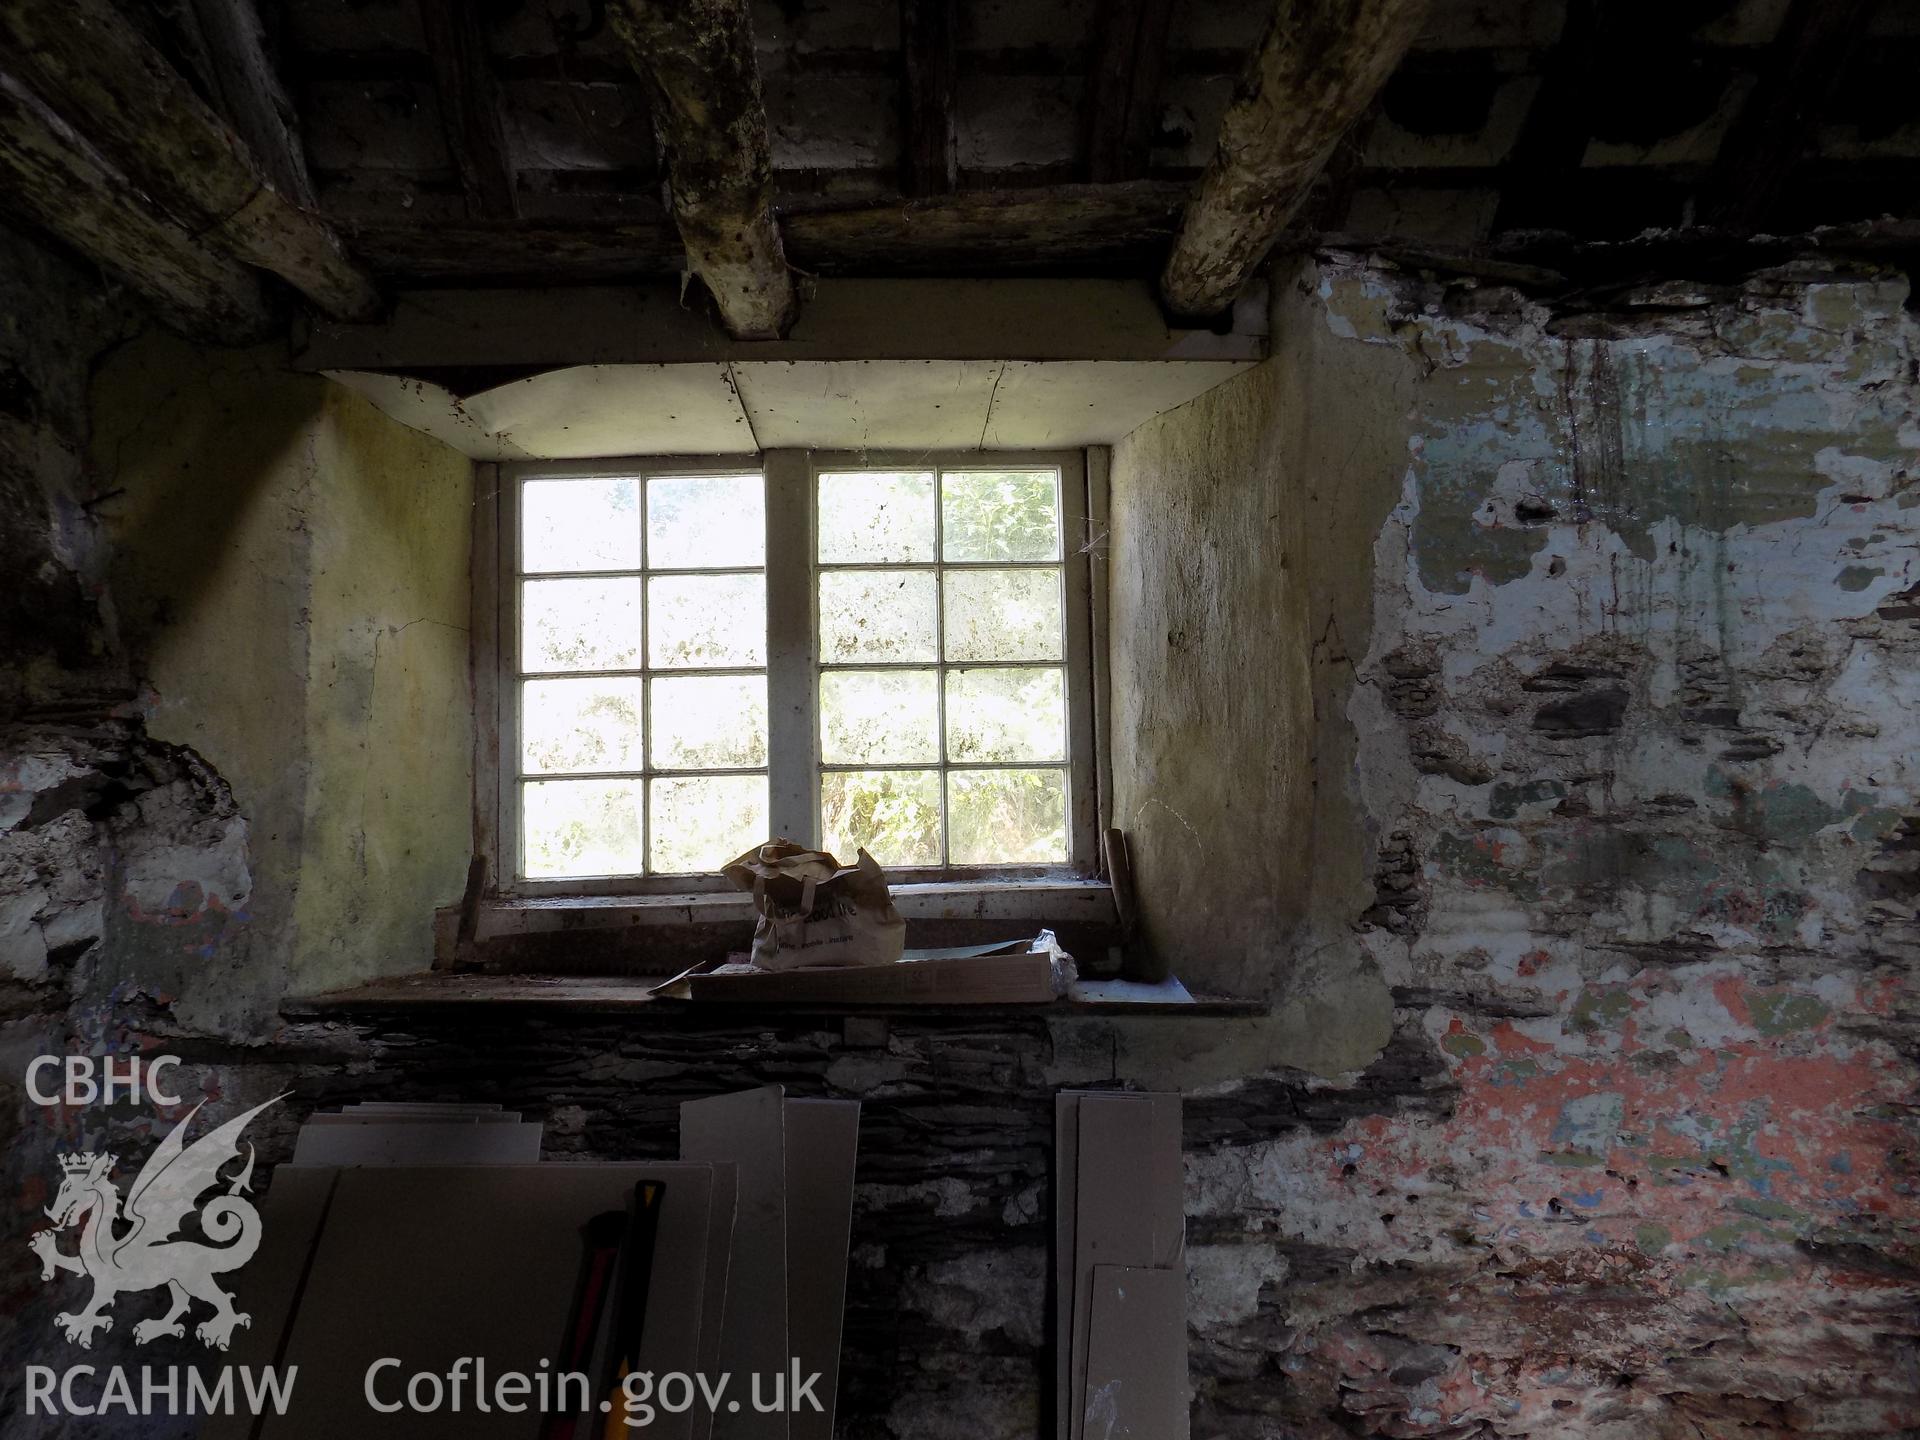 Digital colour photograph showing interior view of window in building attached to Tywyll Nodwydd house, Pennal, dated 2019. Photographed by Mr Gary Coulsby to meet a condition attached to a planning application.